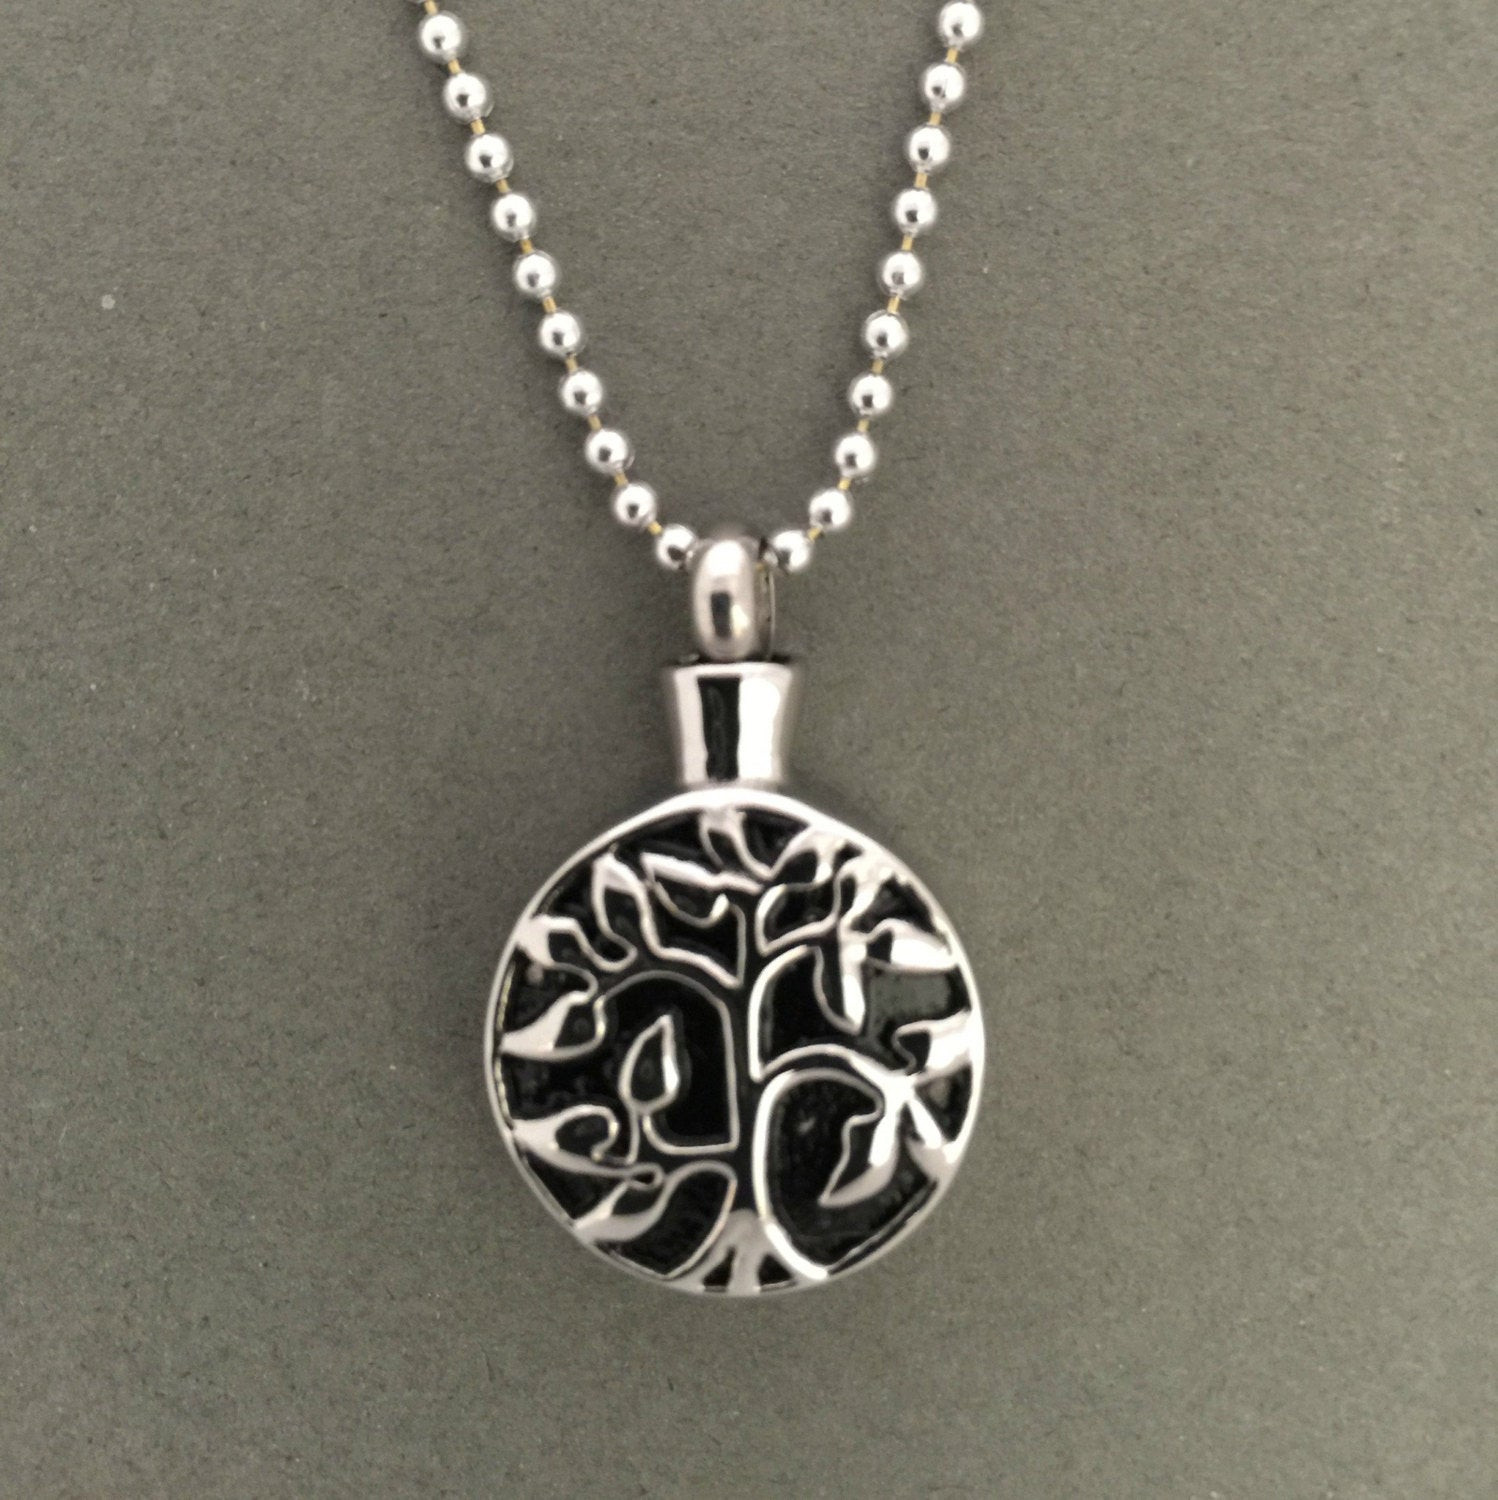 Necklace To Put Ashes In
 Tree of Life Urn Necklace Ashes Holder Cremation Jewelry